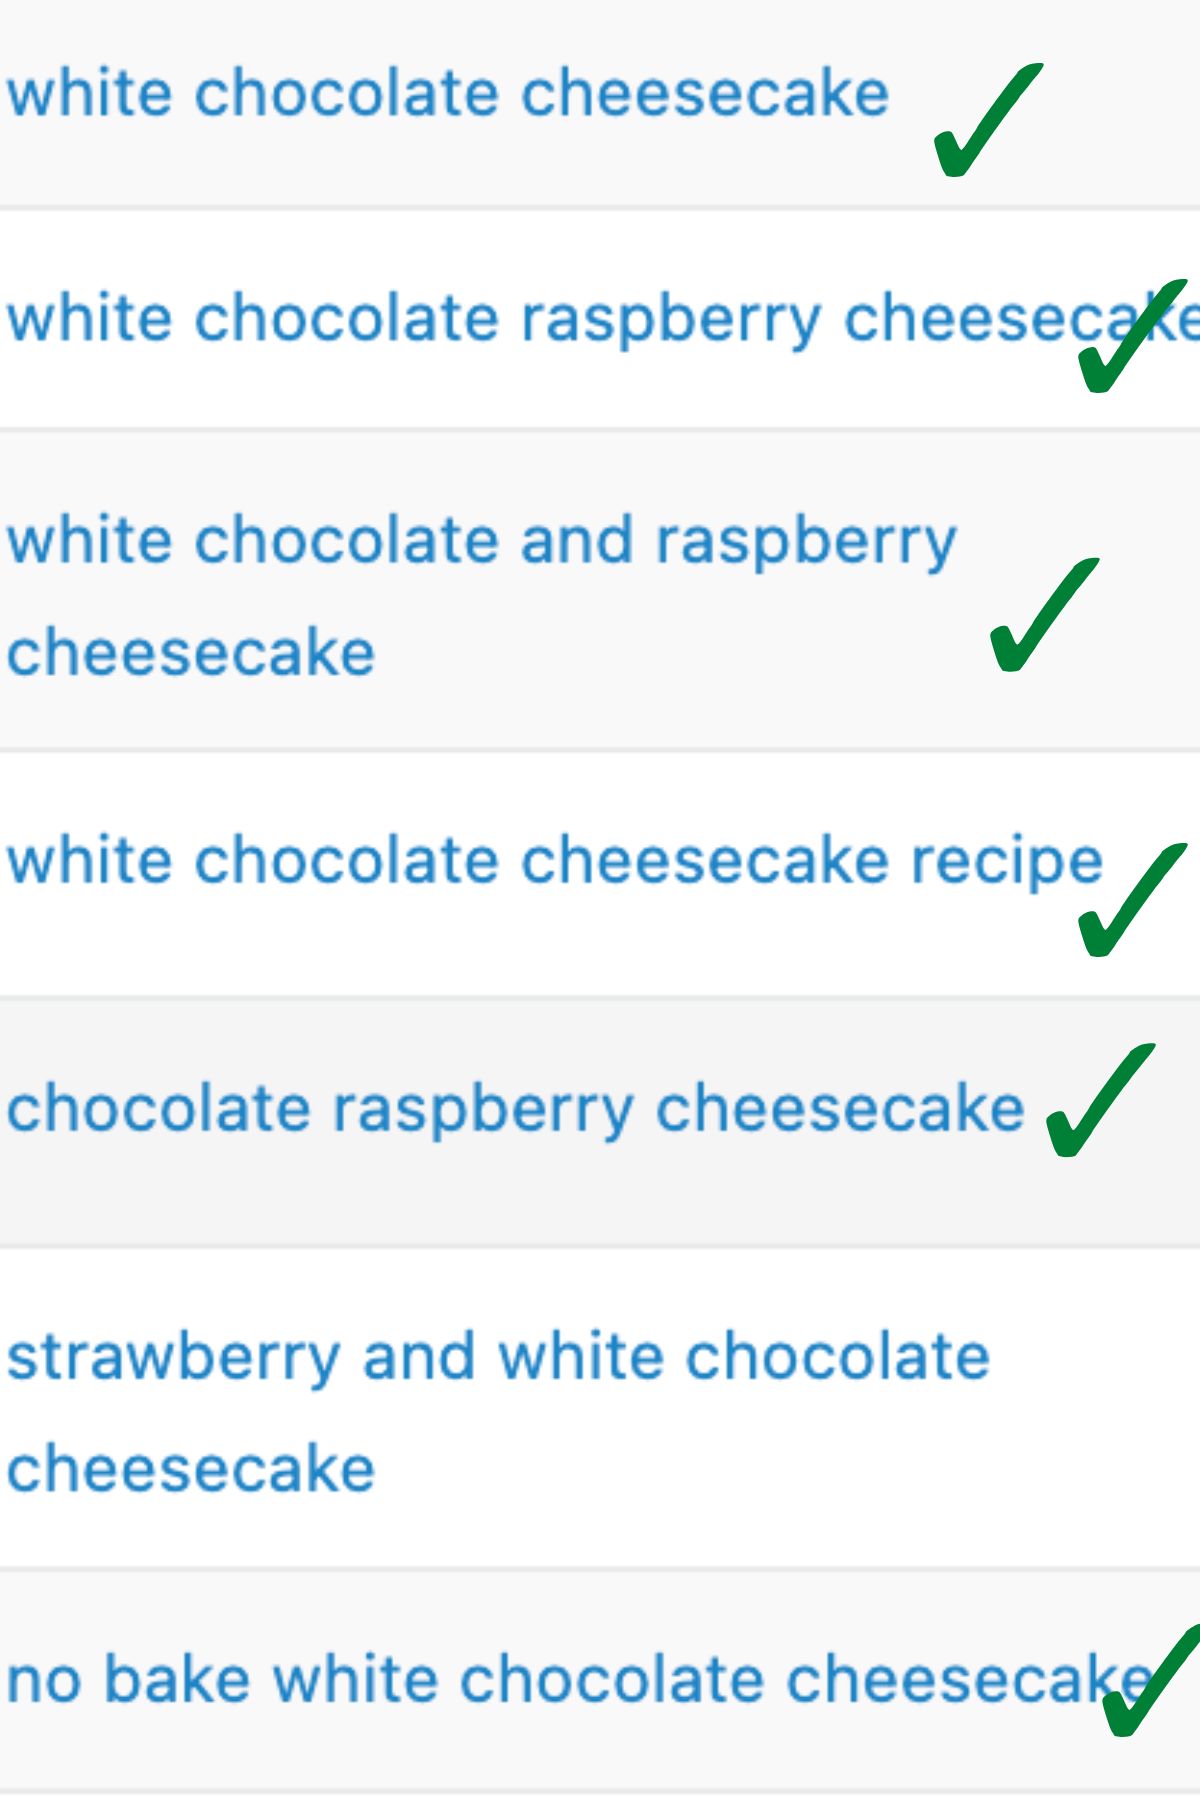 Blue text using variations of the words "raspberry and white chocolate cheesecake" with green check marks next to them.